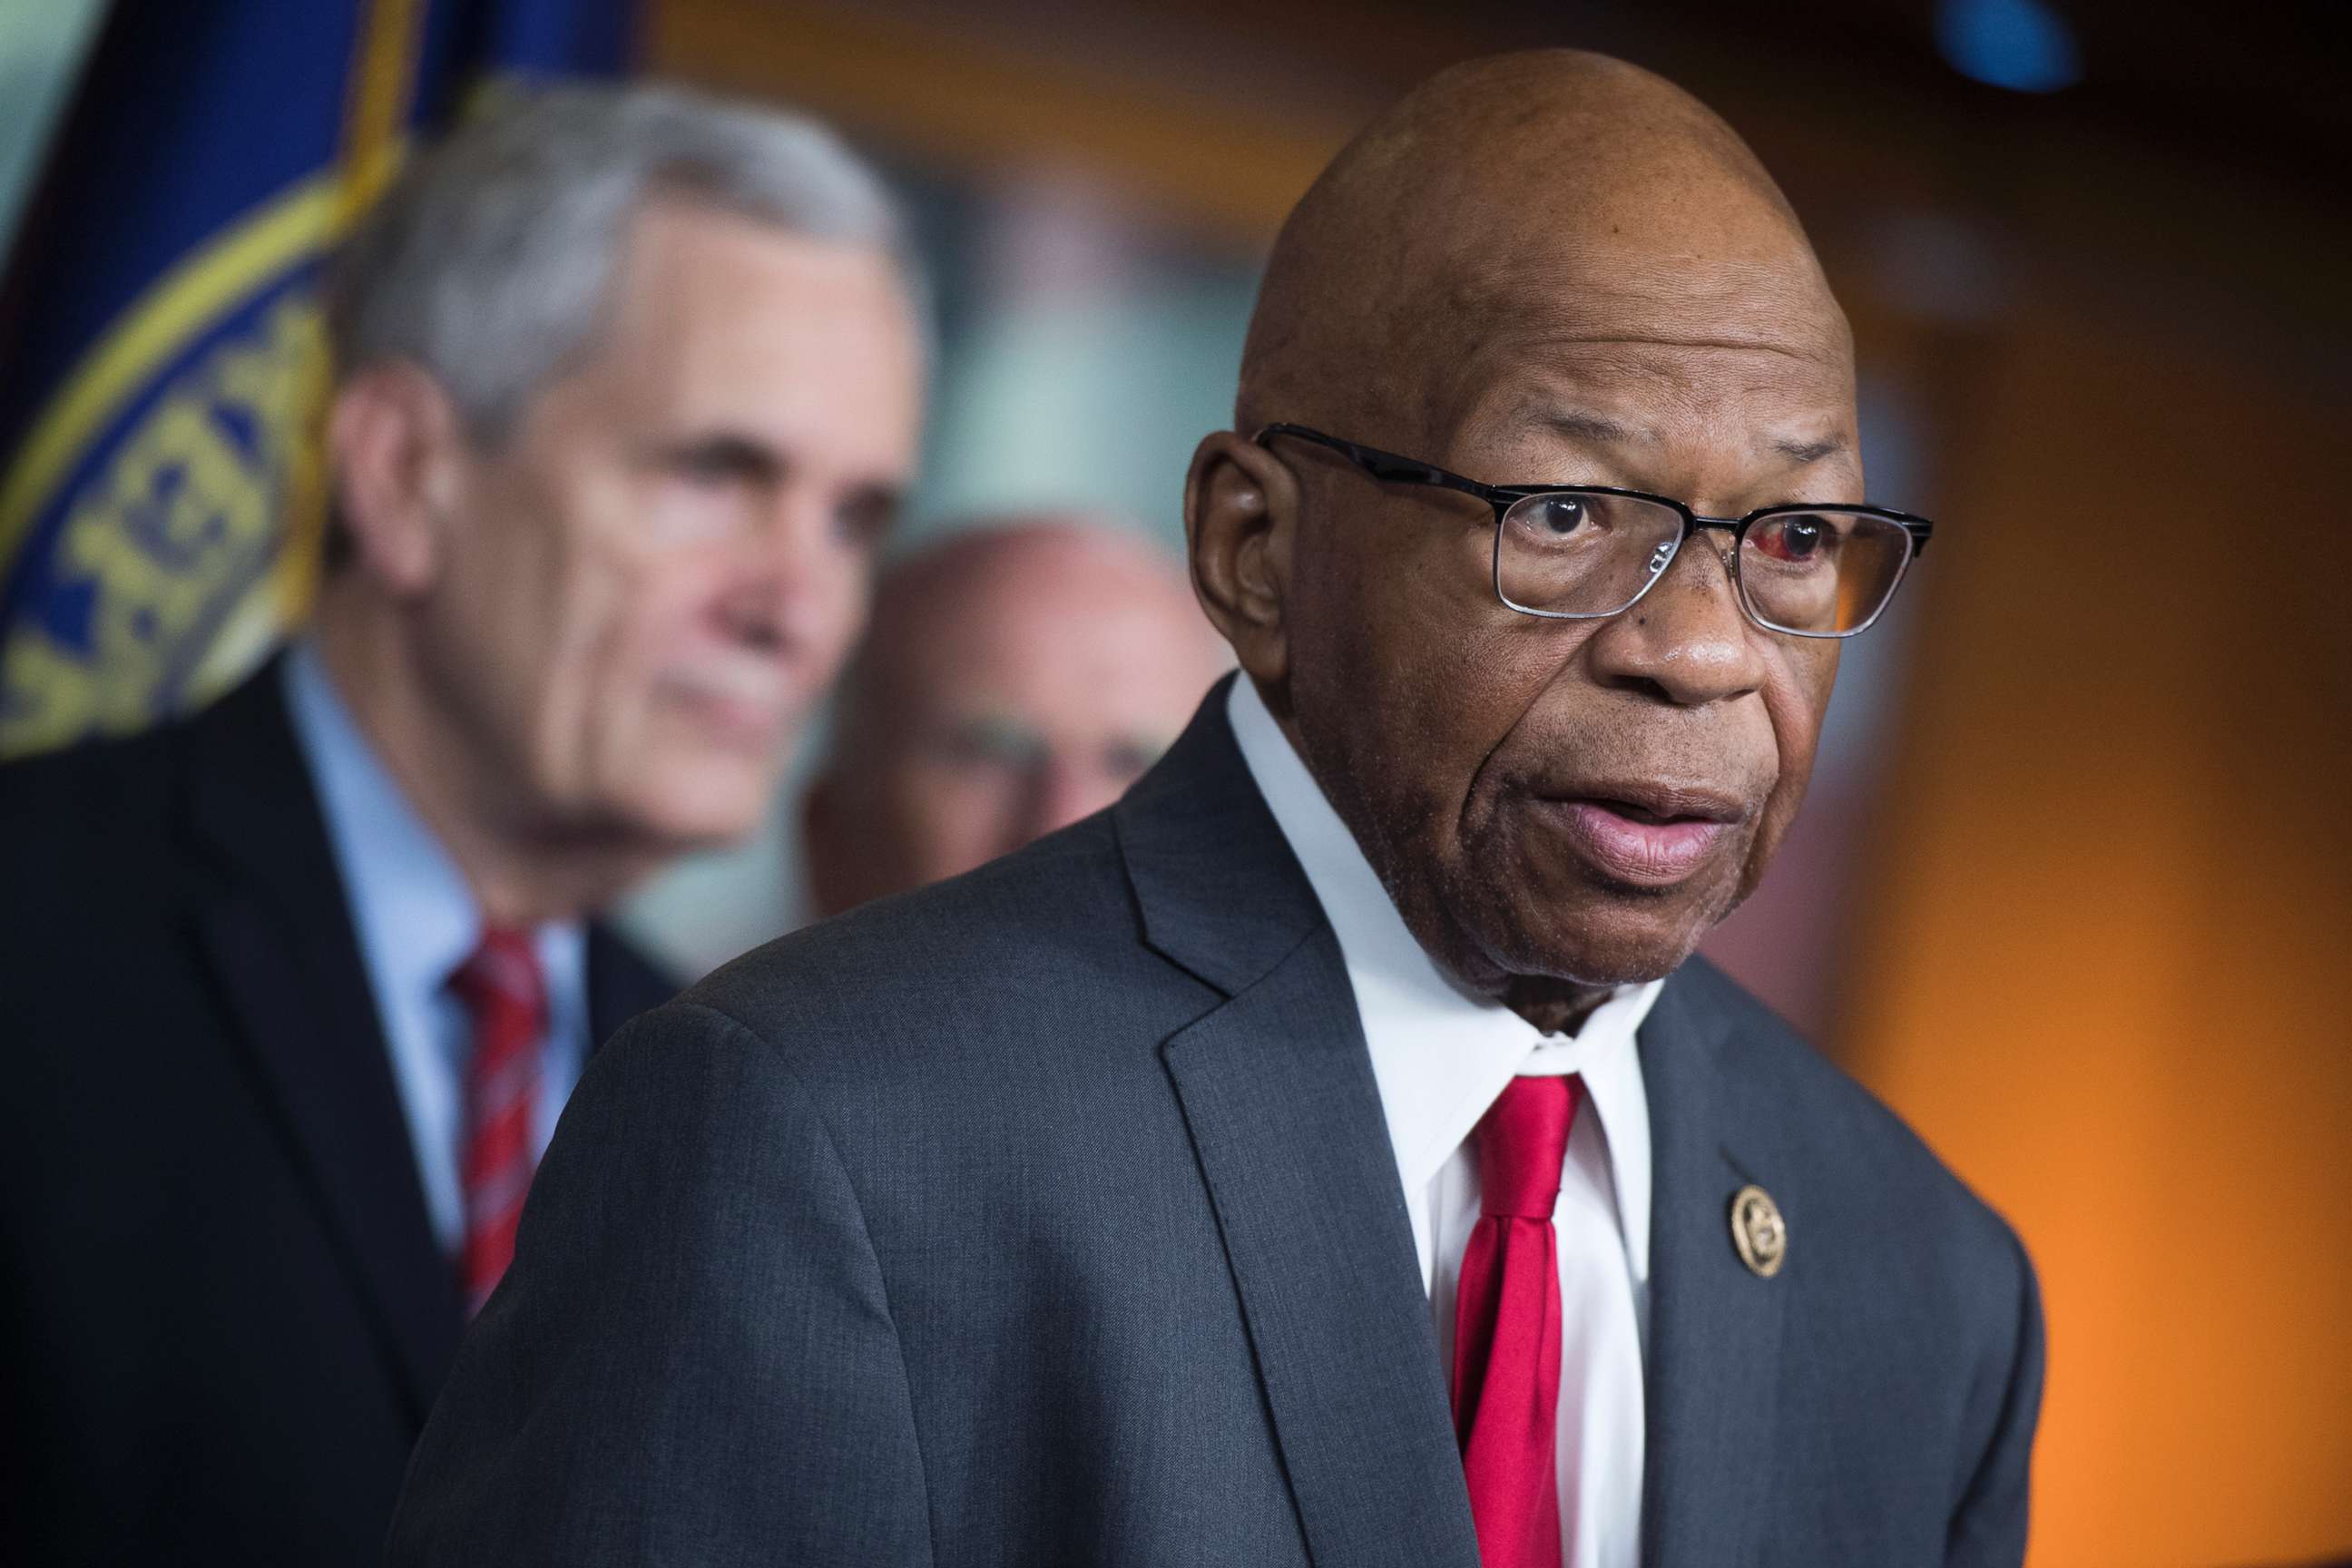 PHOTO: Rep. Elijah Cummings speaks during a news conference in the Capitol Visitor Center, May 10, 2018.